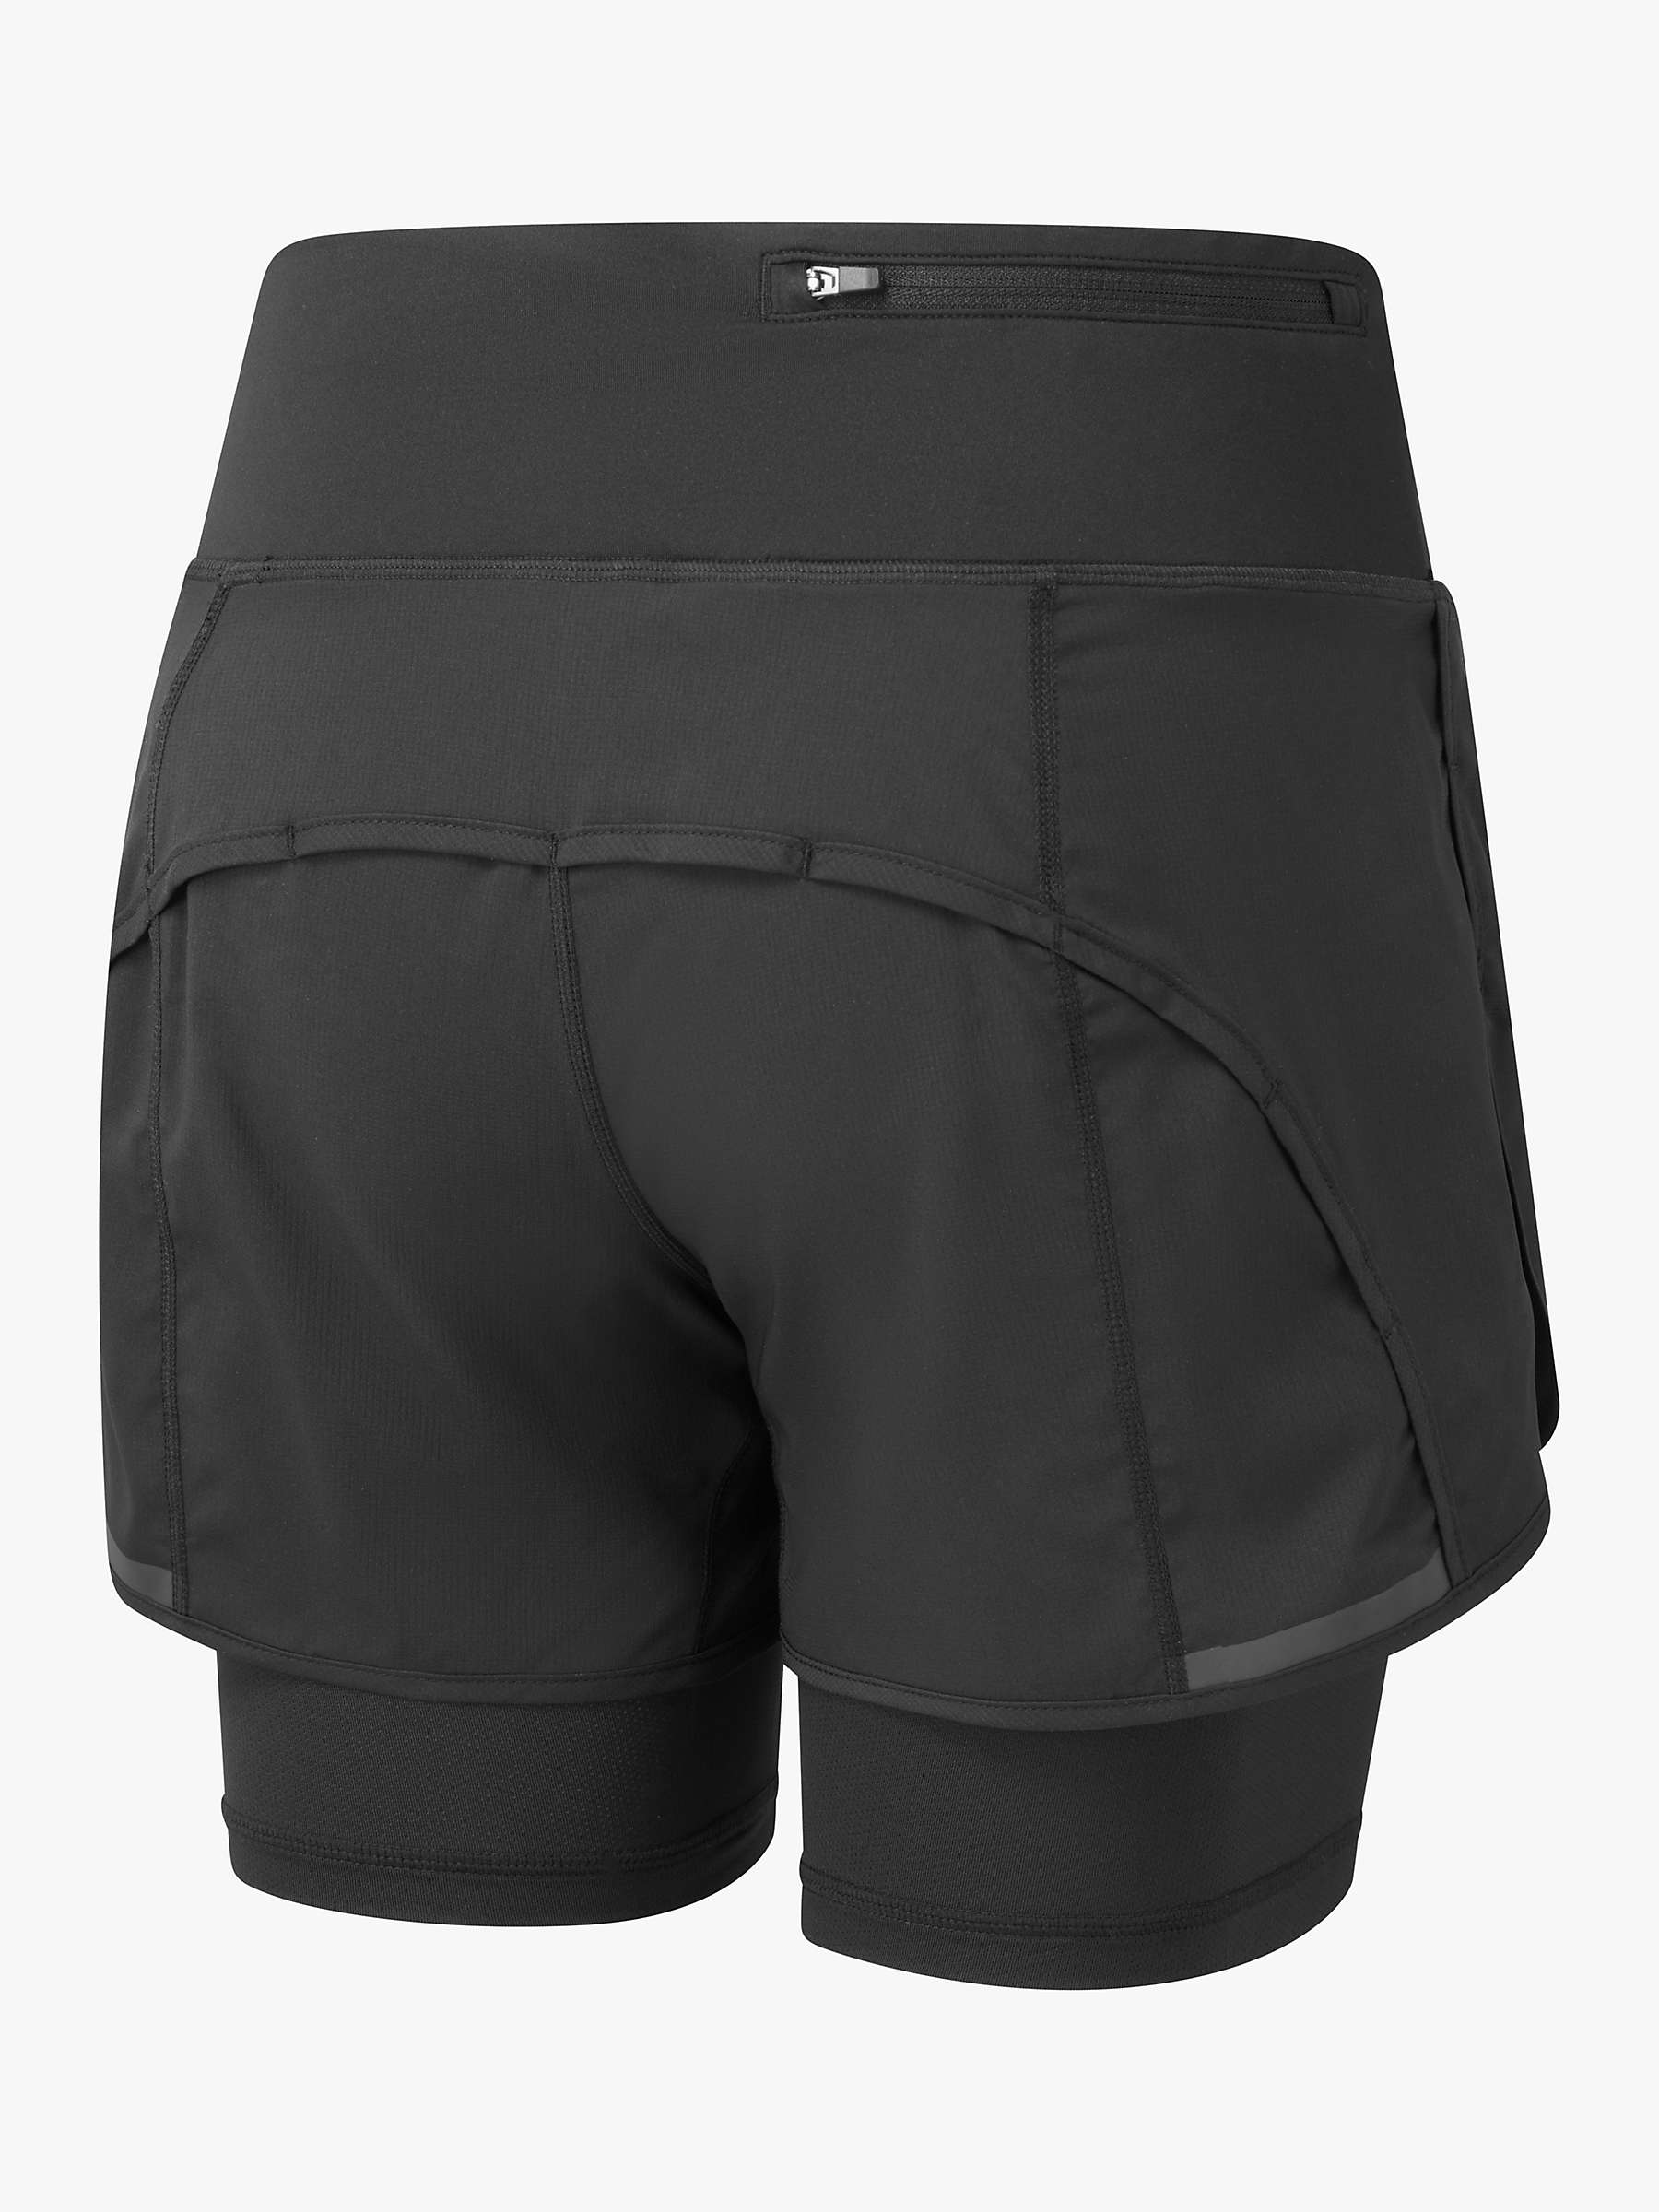 Buy Ronhill Two-in-One Shorts, Black Online at johnlewis.com